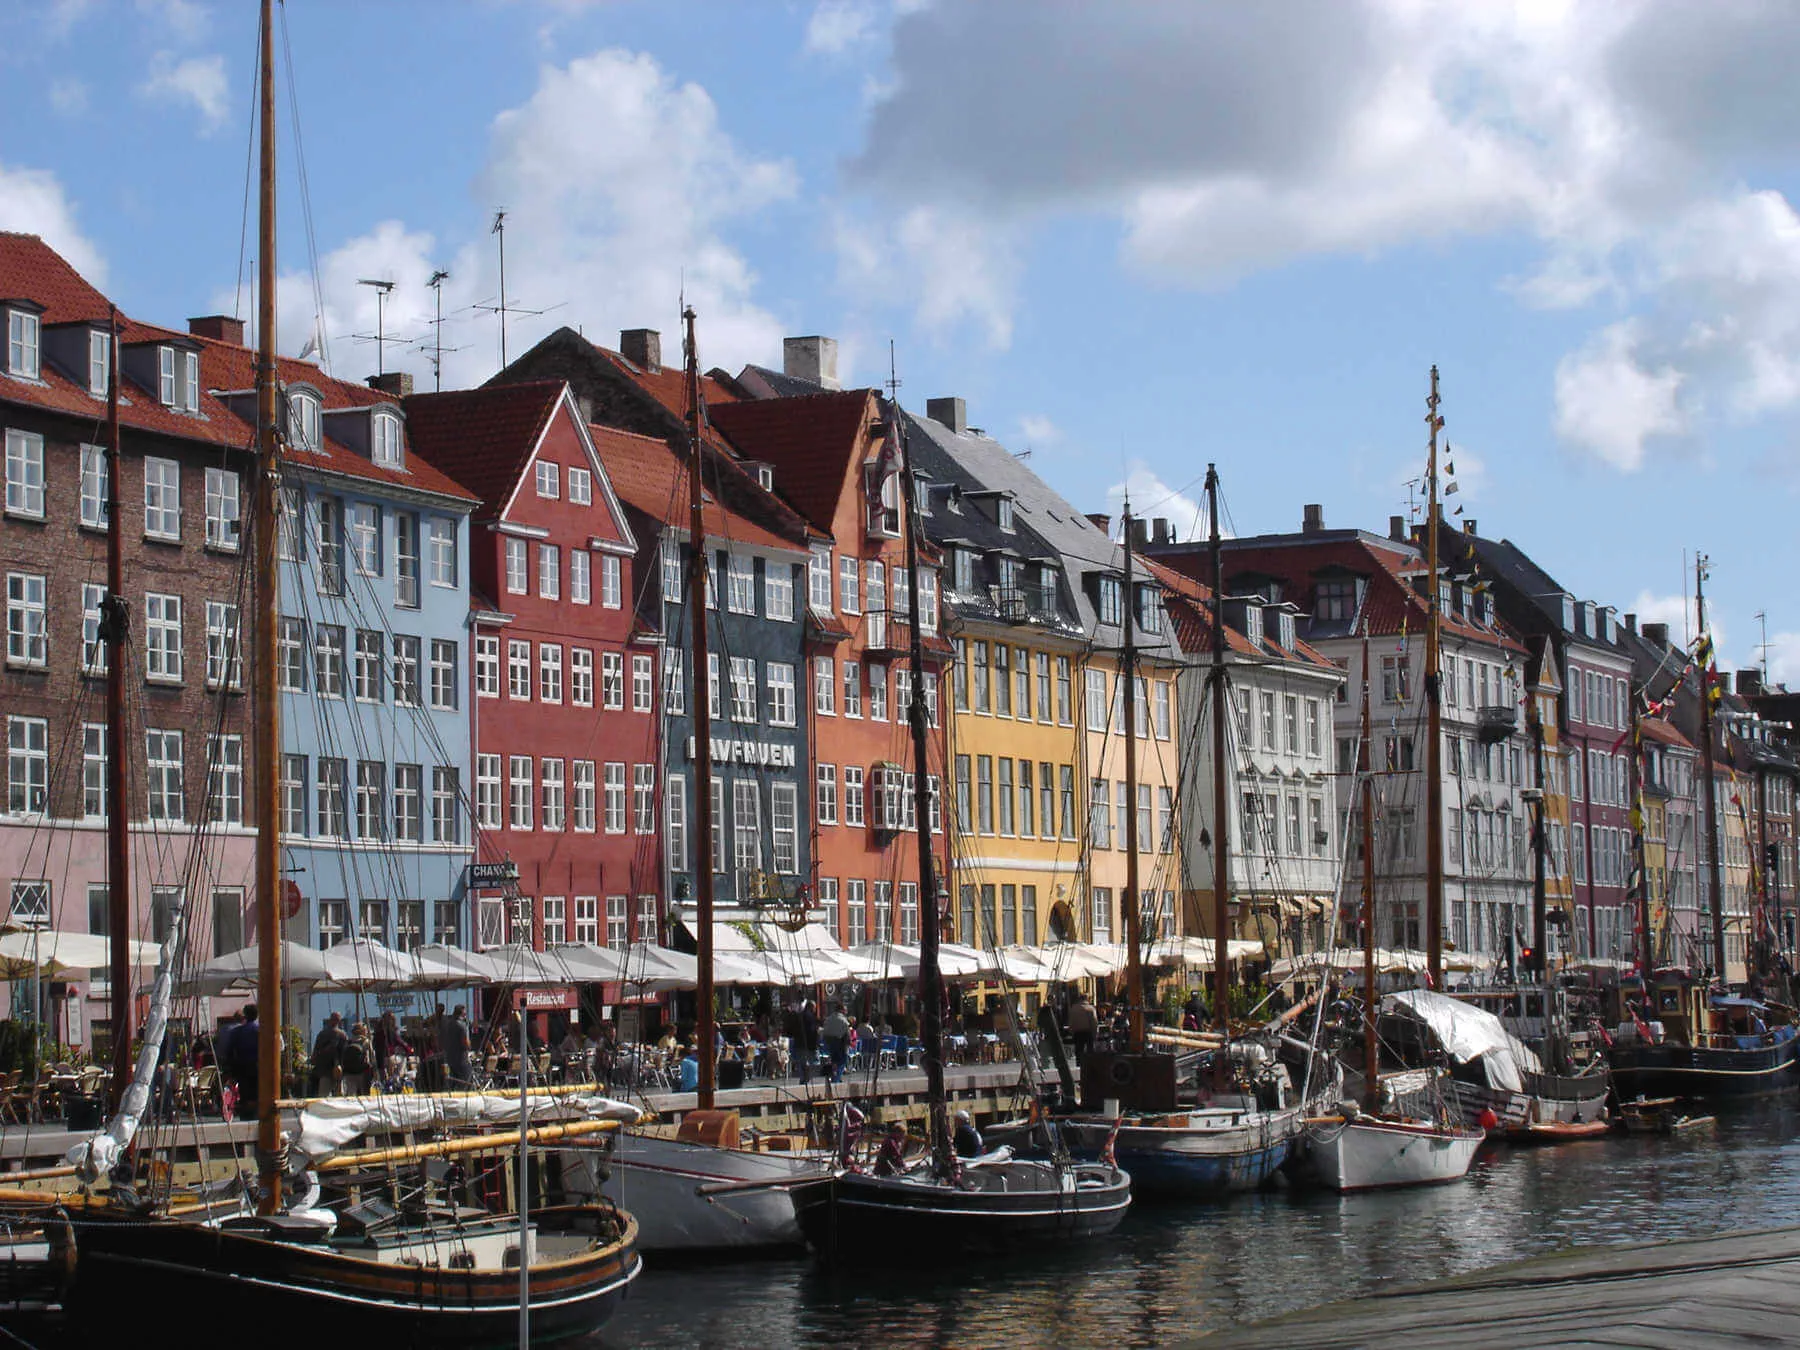 The colorful Nyhavn neighborhood is the place to moor on a sunny day in Copenhagen